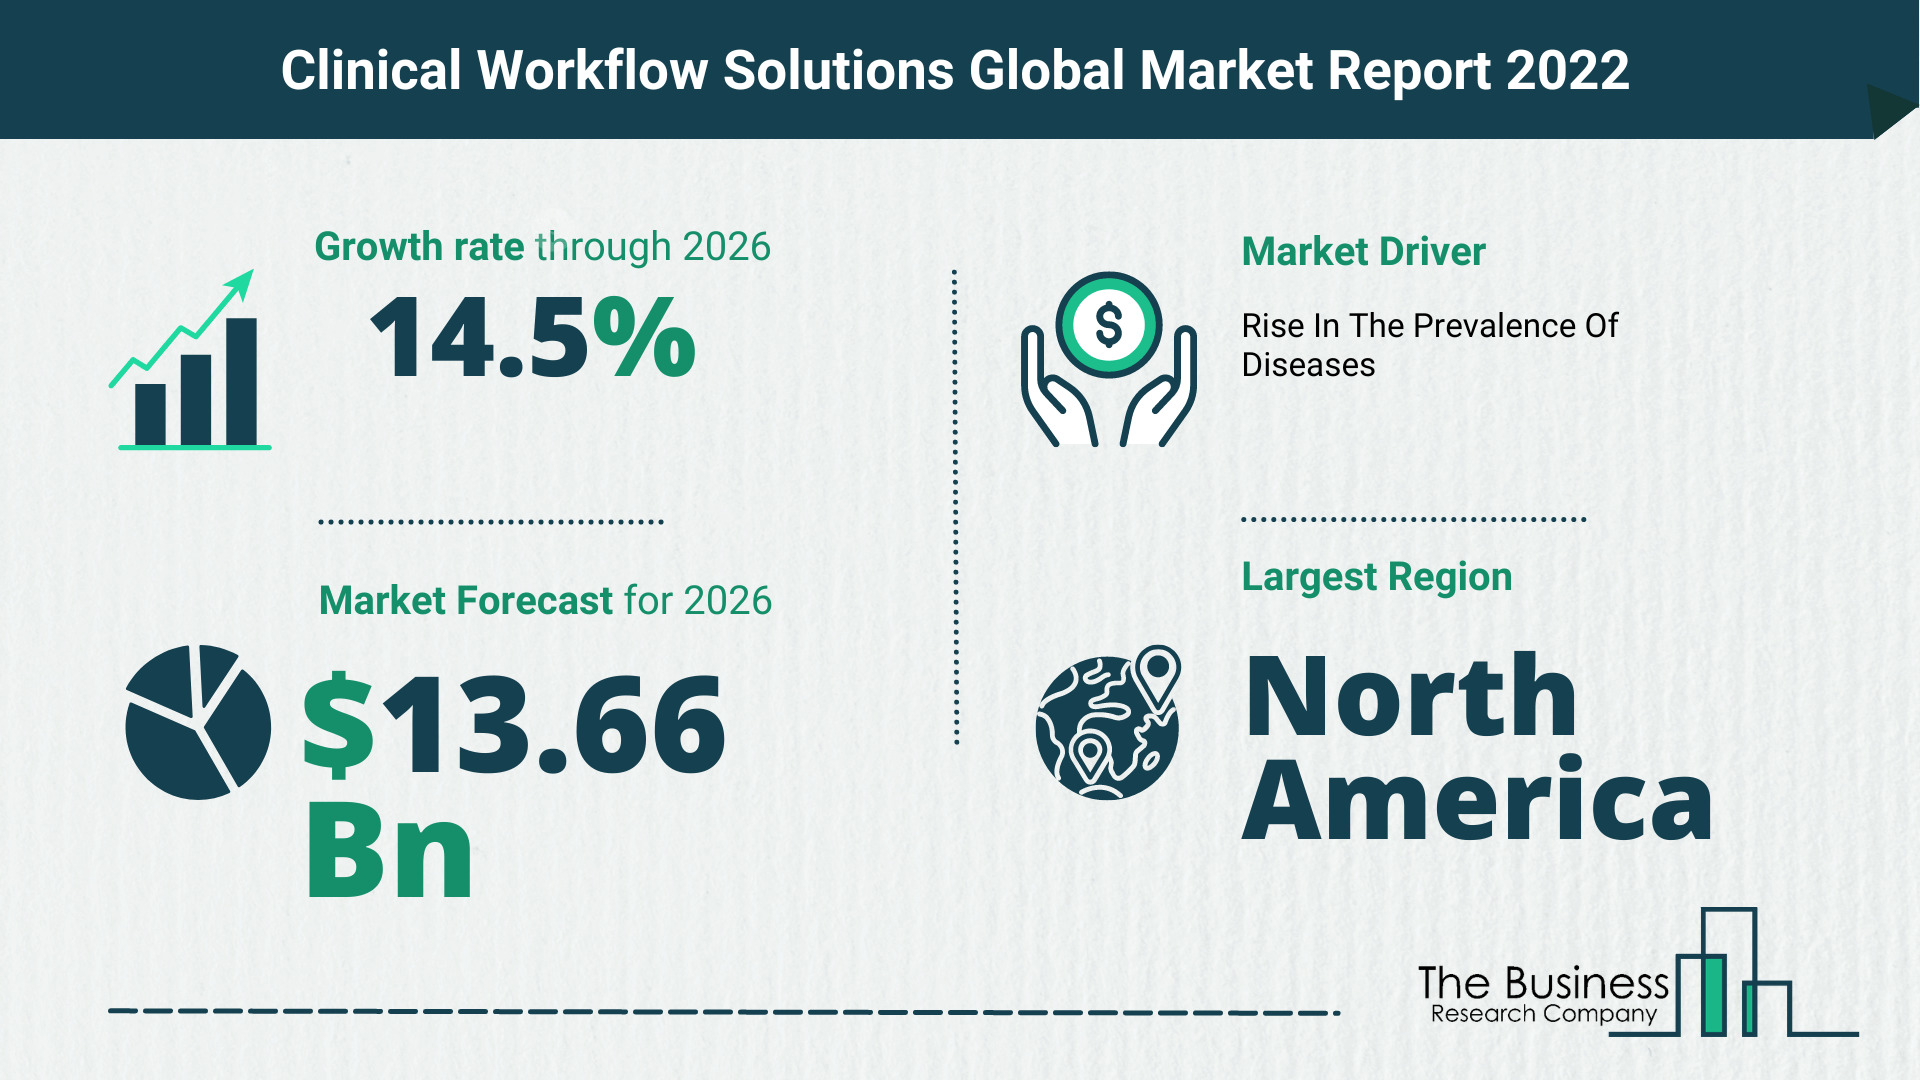 Global Clinical Workflow Solutions Market